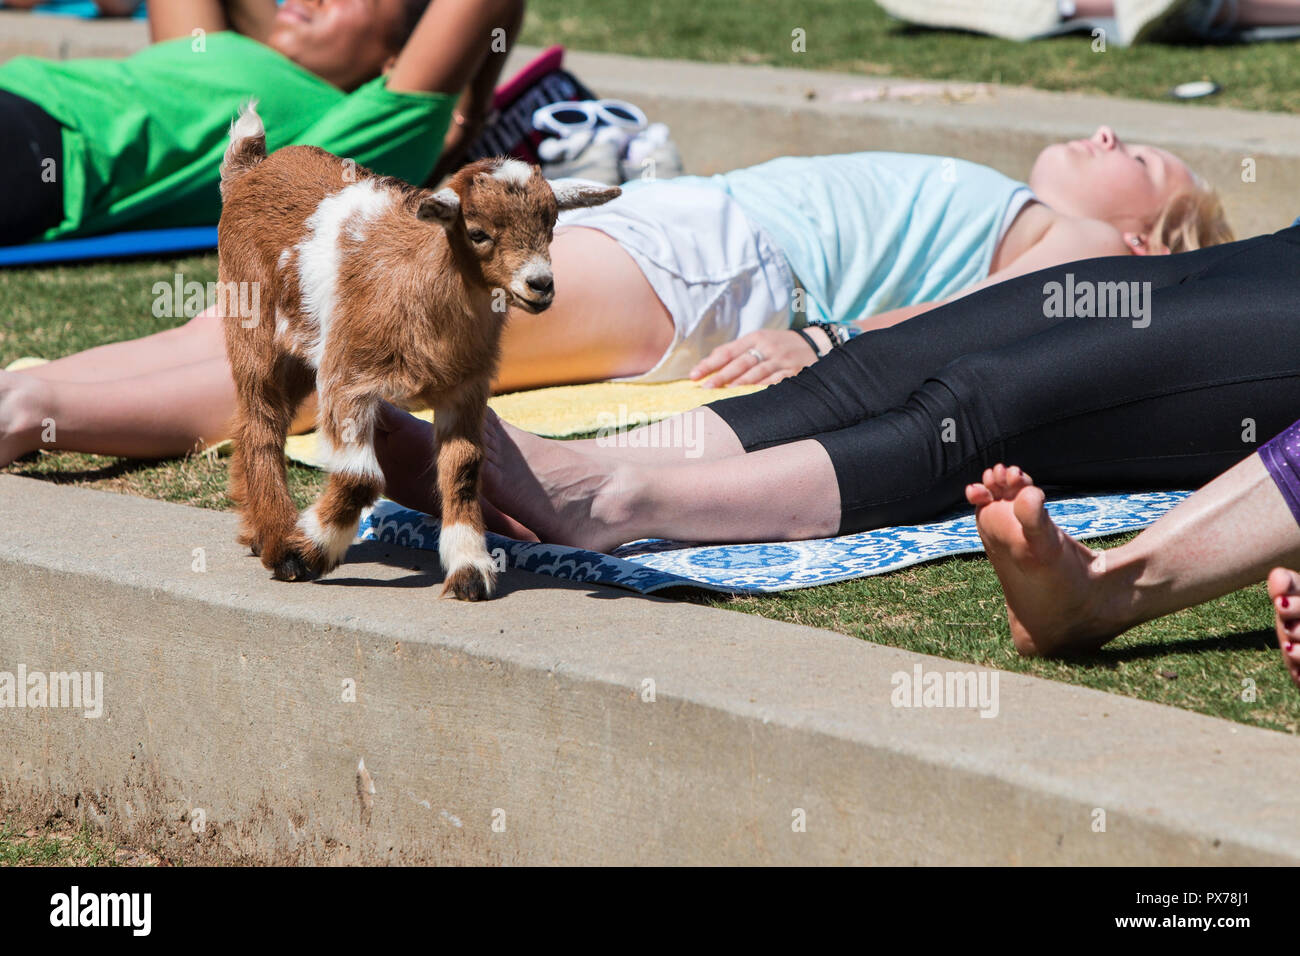 Suwanee, GA, USA - April 29, 2018:  A baby goat walks on a curb in front of women stretching in a goat yoga event at a public park on April 29, 2018. Stock Photo